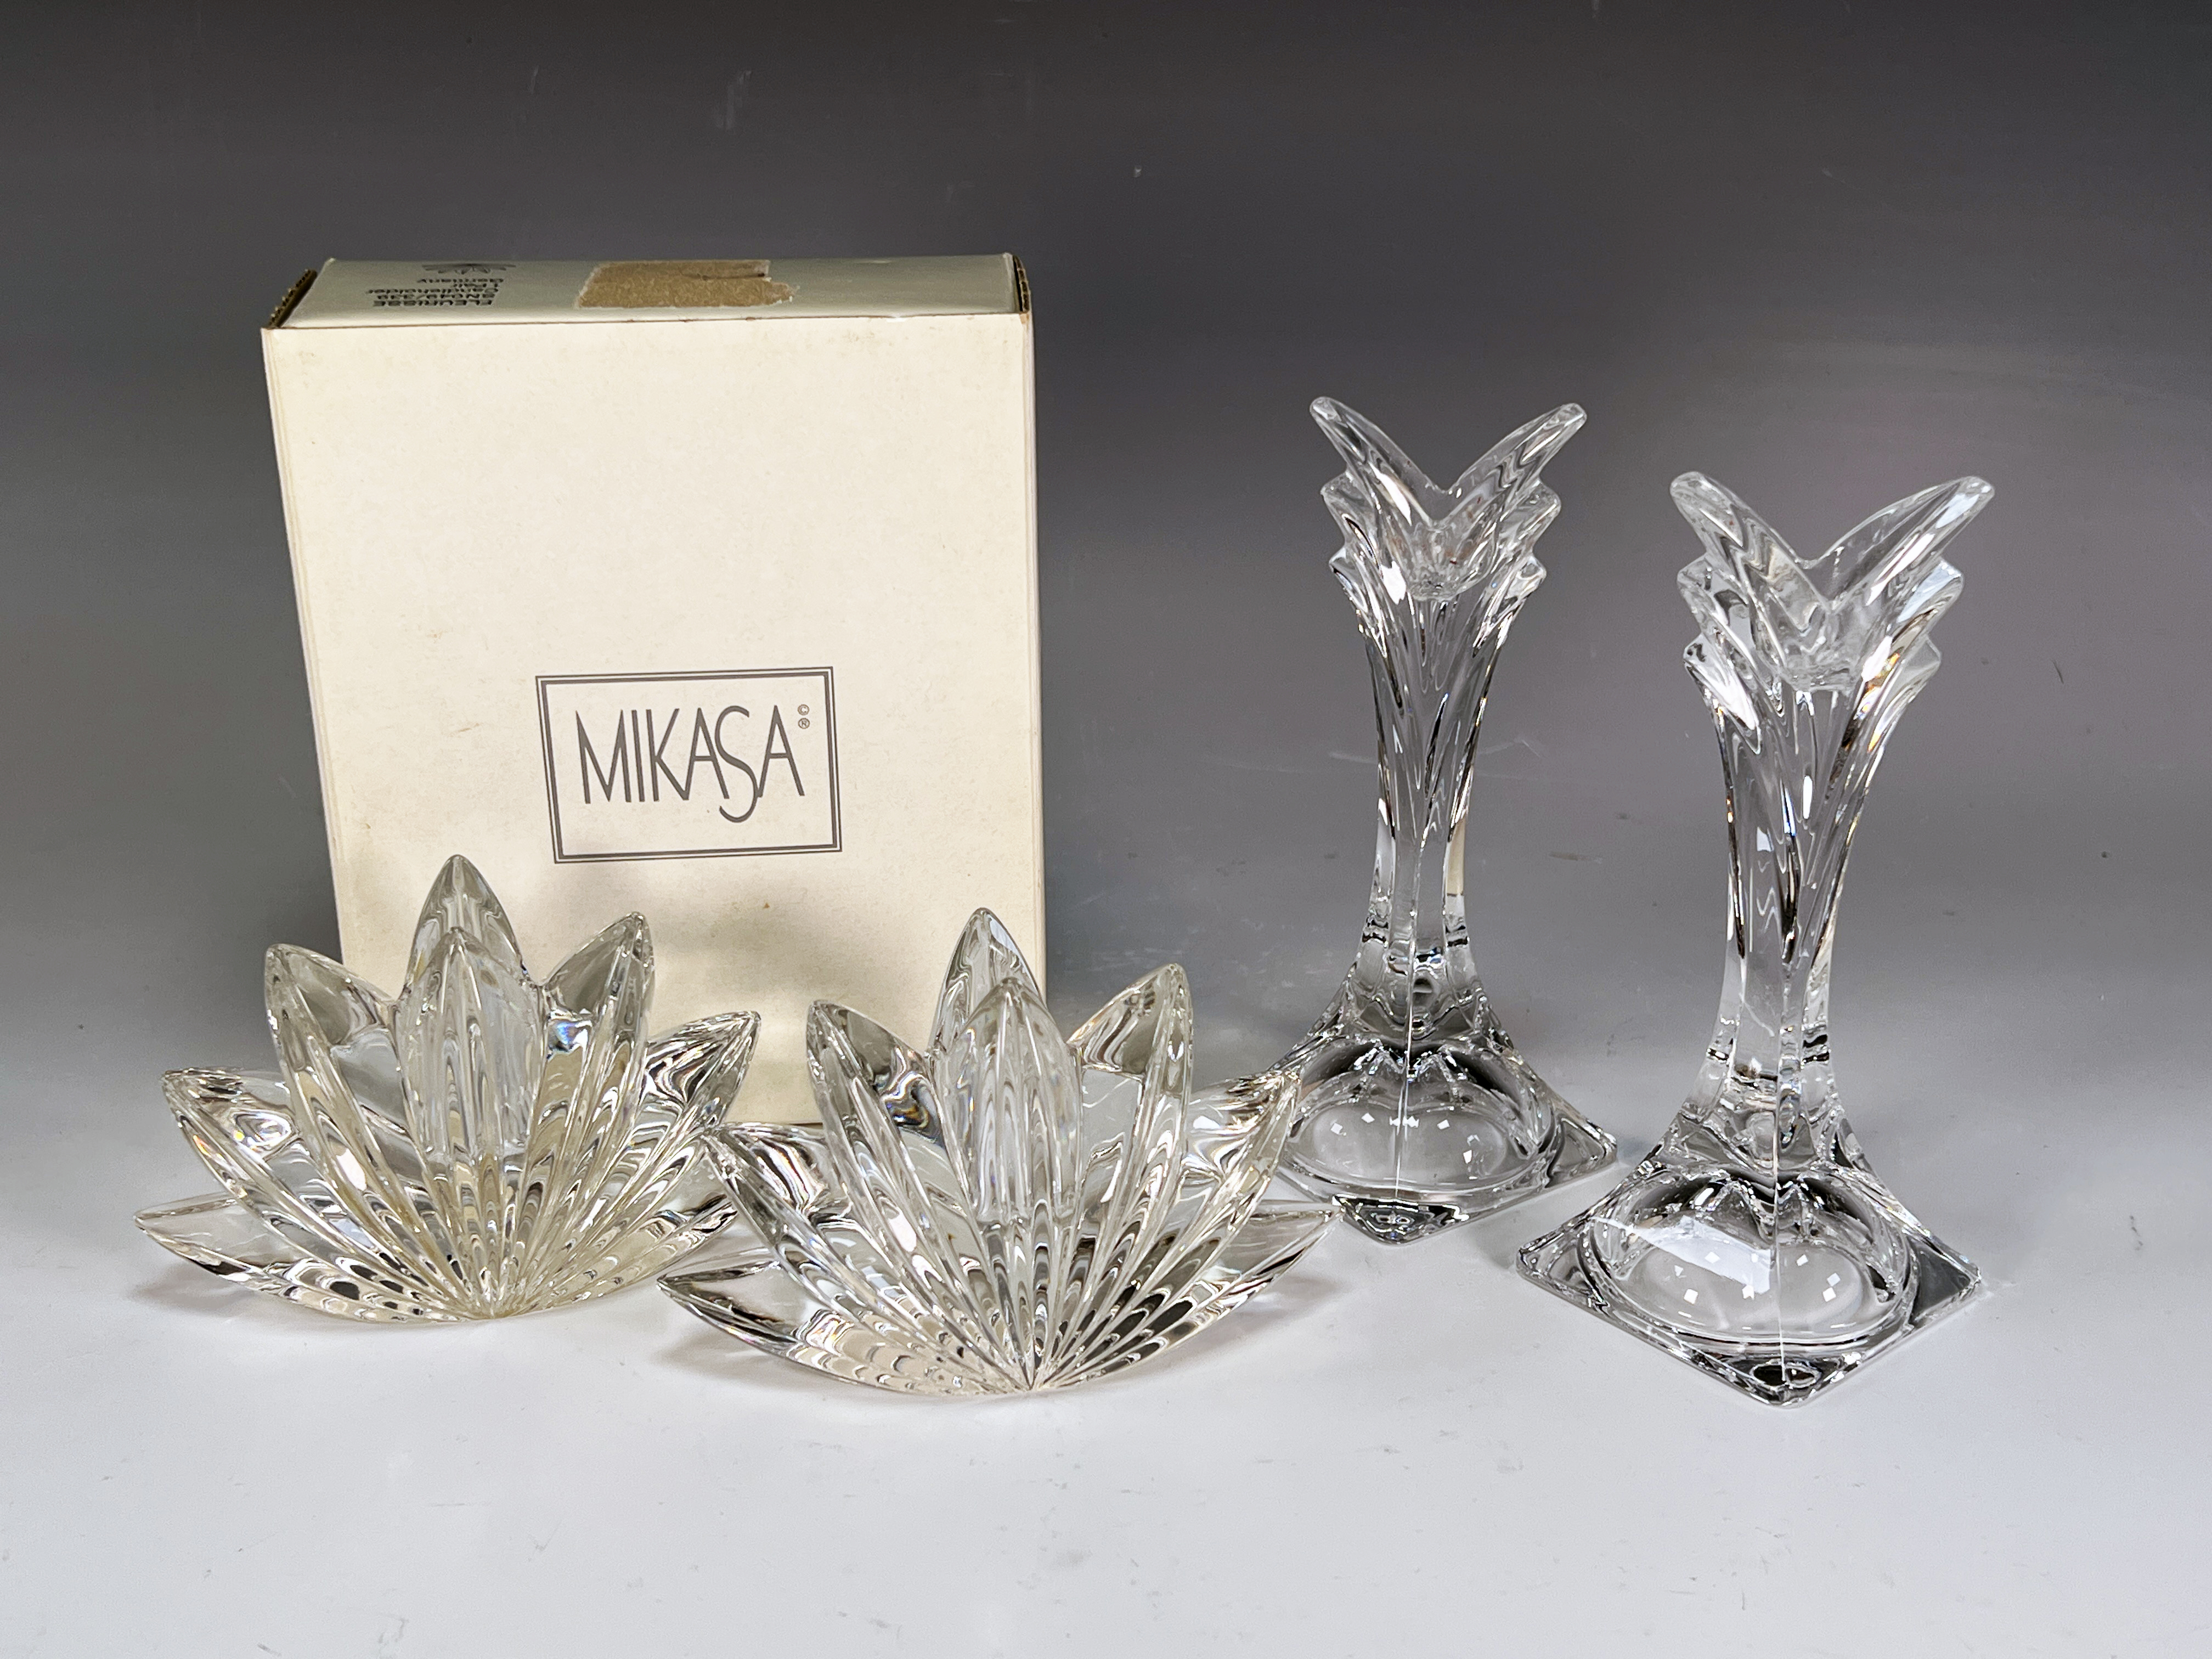 Mikasa Fleuisse Candleholders In Box & Pair Deco Candlesticks  image 1